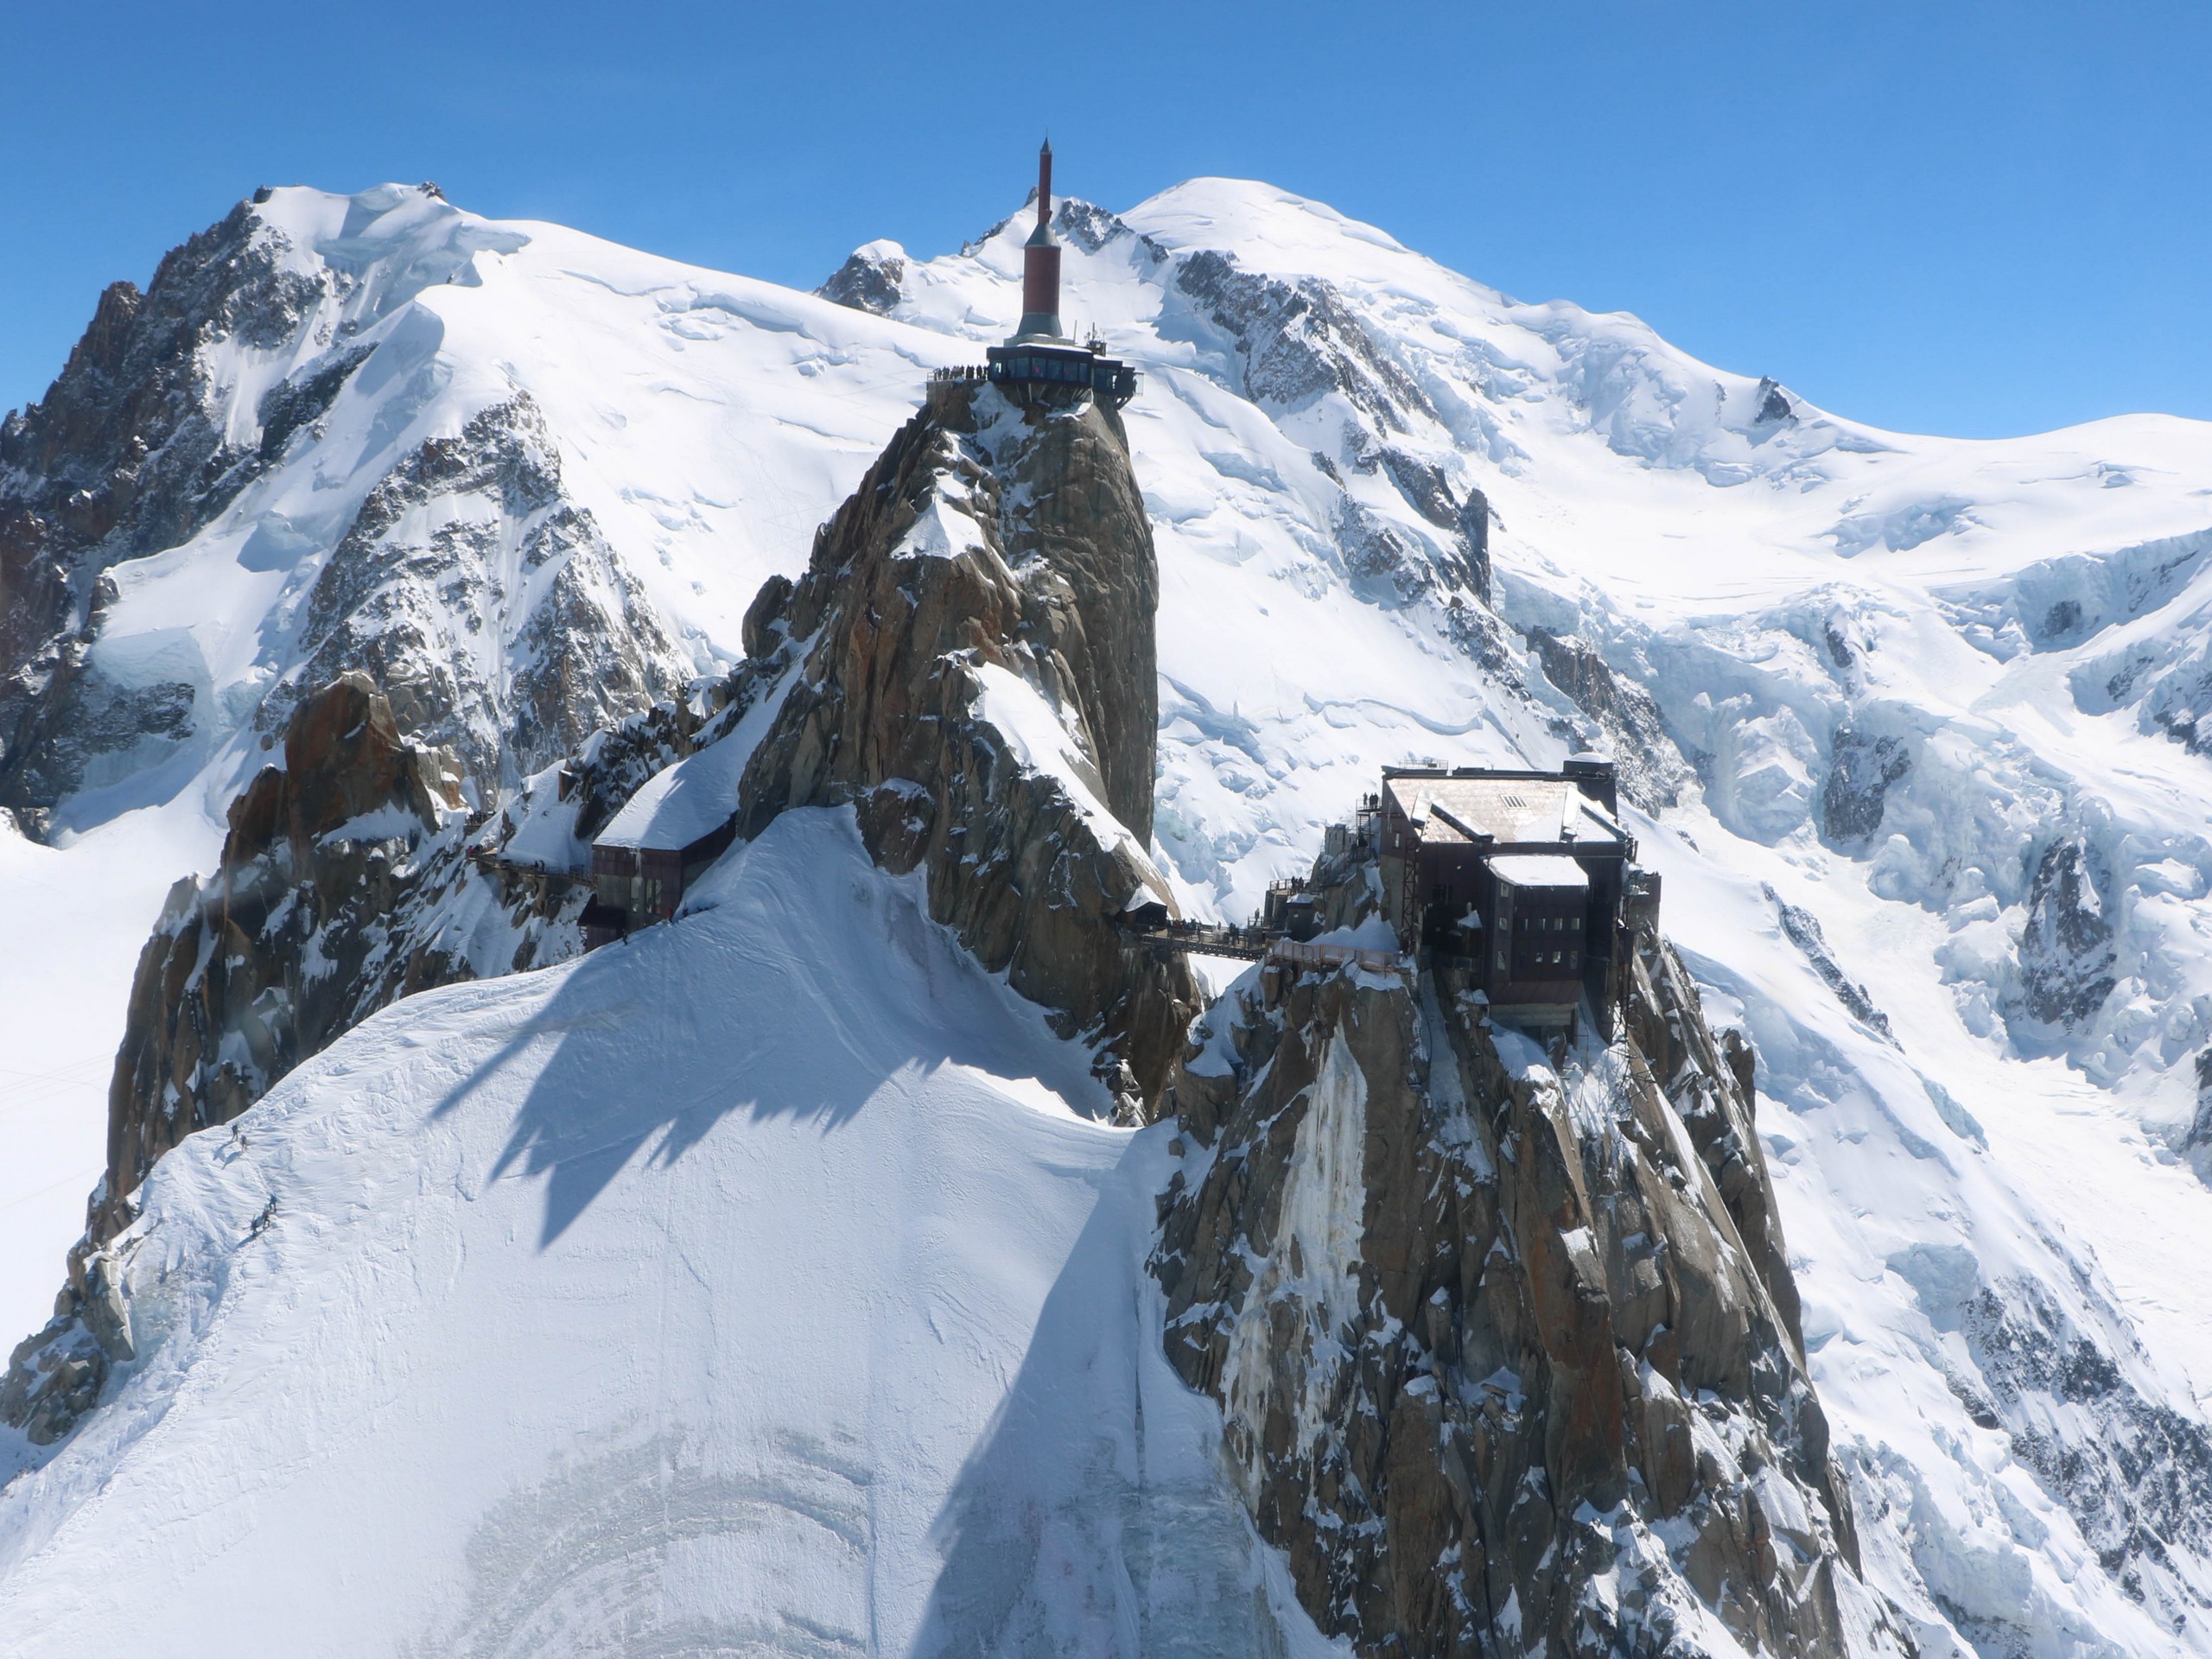 Aiguille du Midi as seen from the above